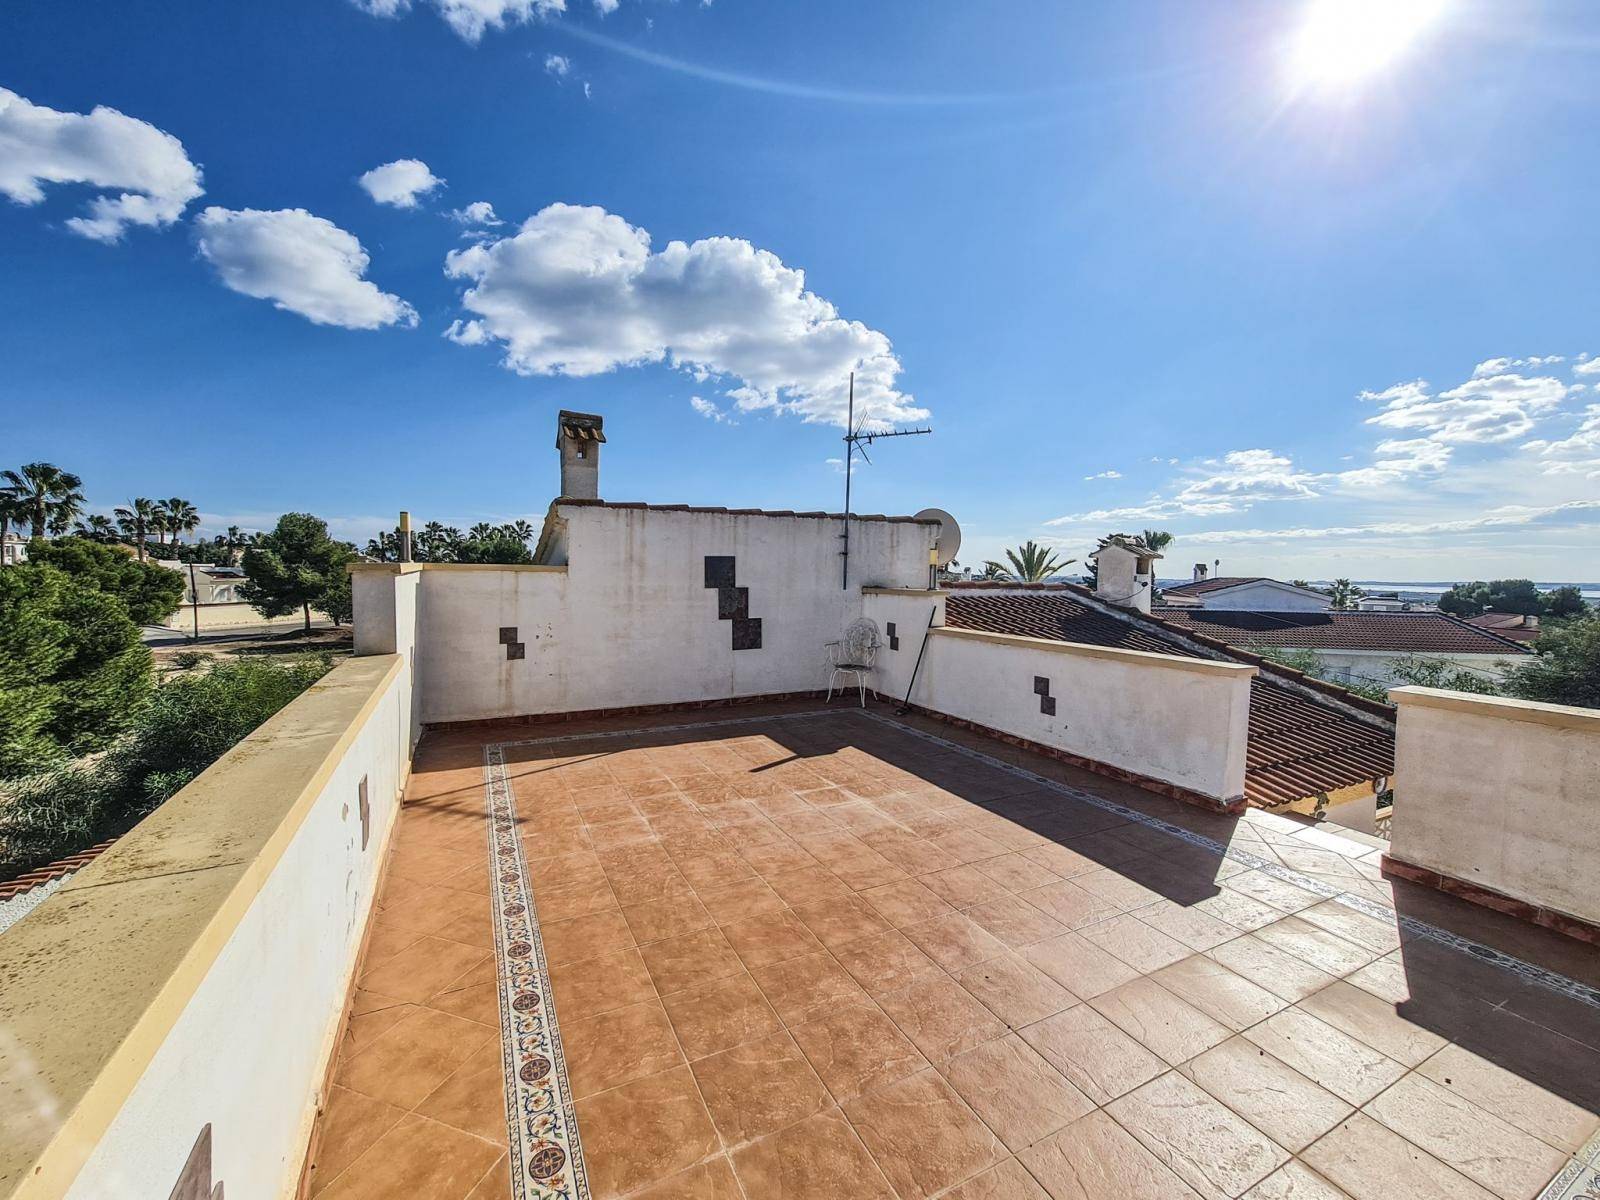 DETACHED VILLA WITH PRIVATE POOL, PARKING AND BEAUTIFUL GARDEN IN CIUADAD QUESADA